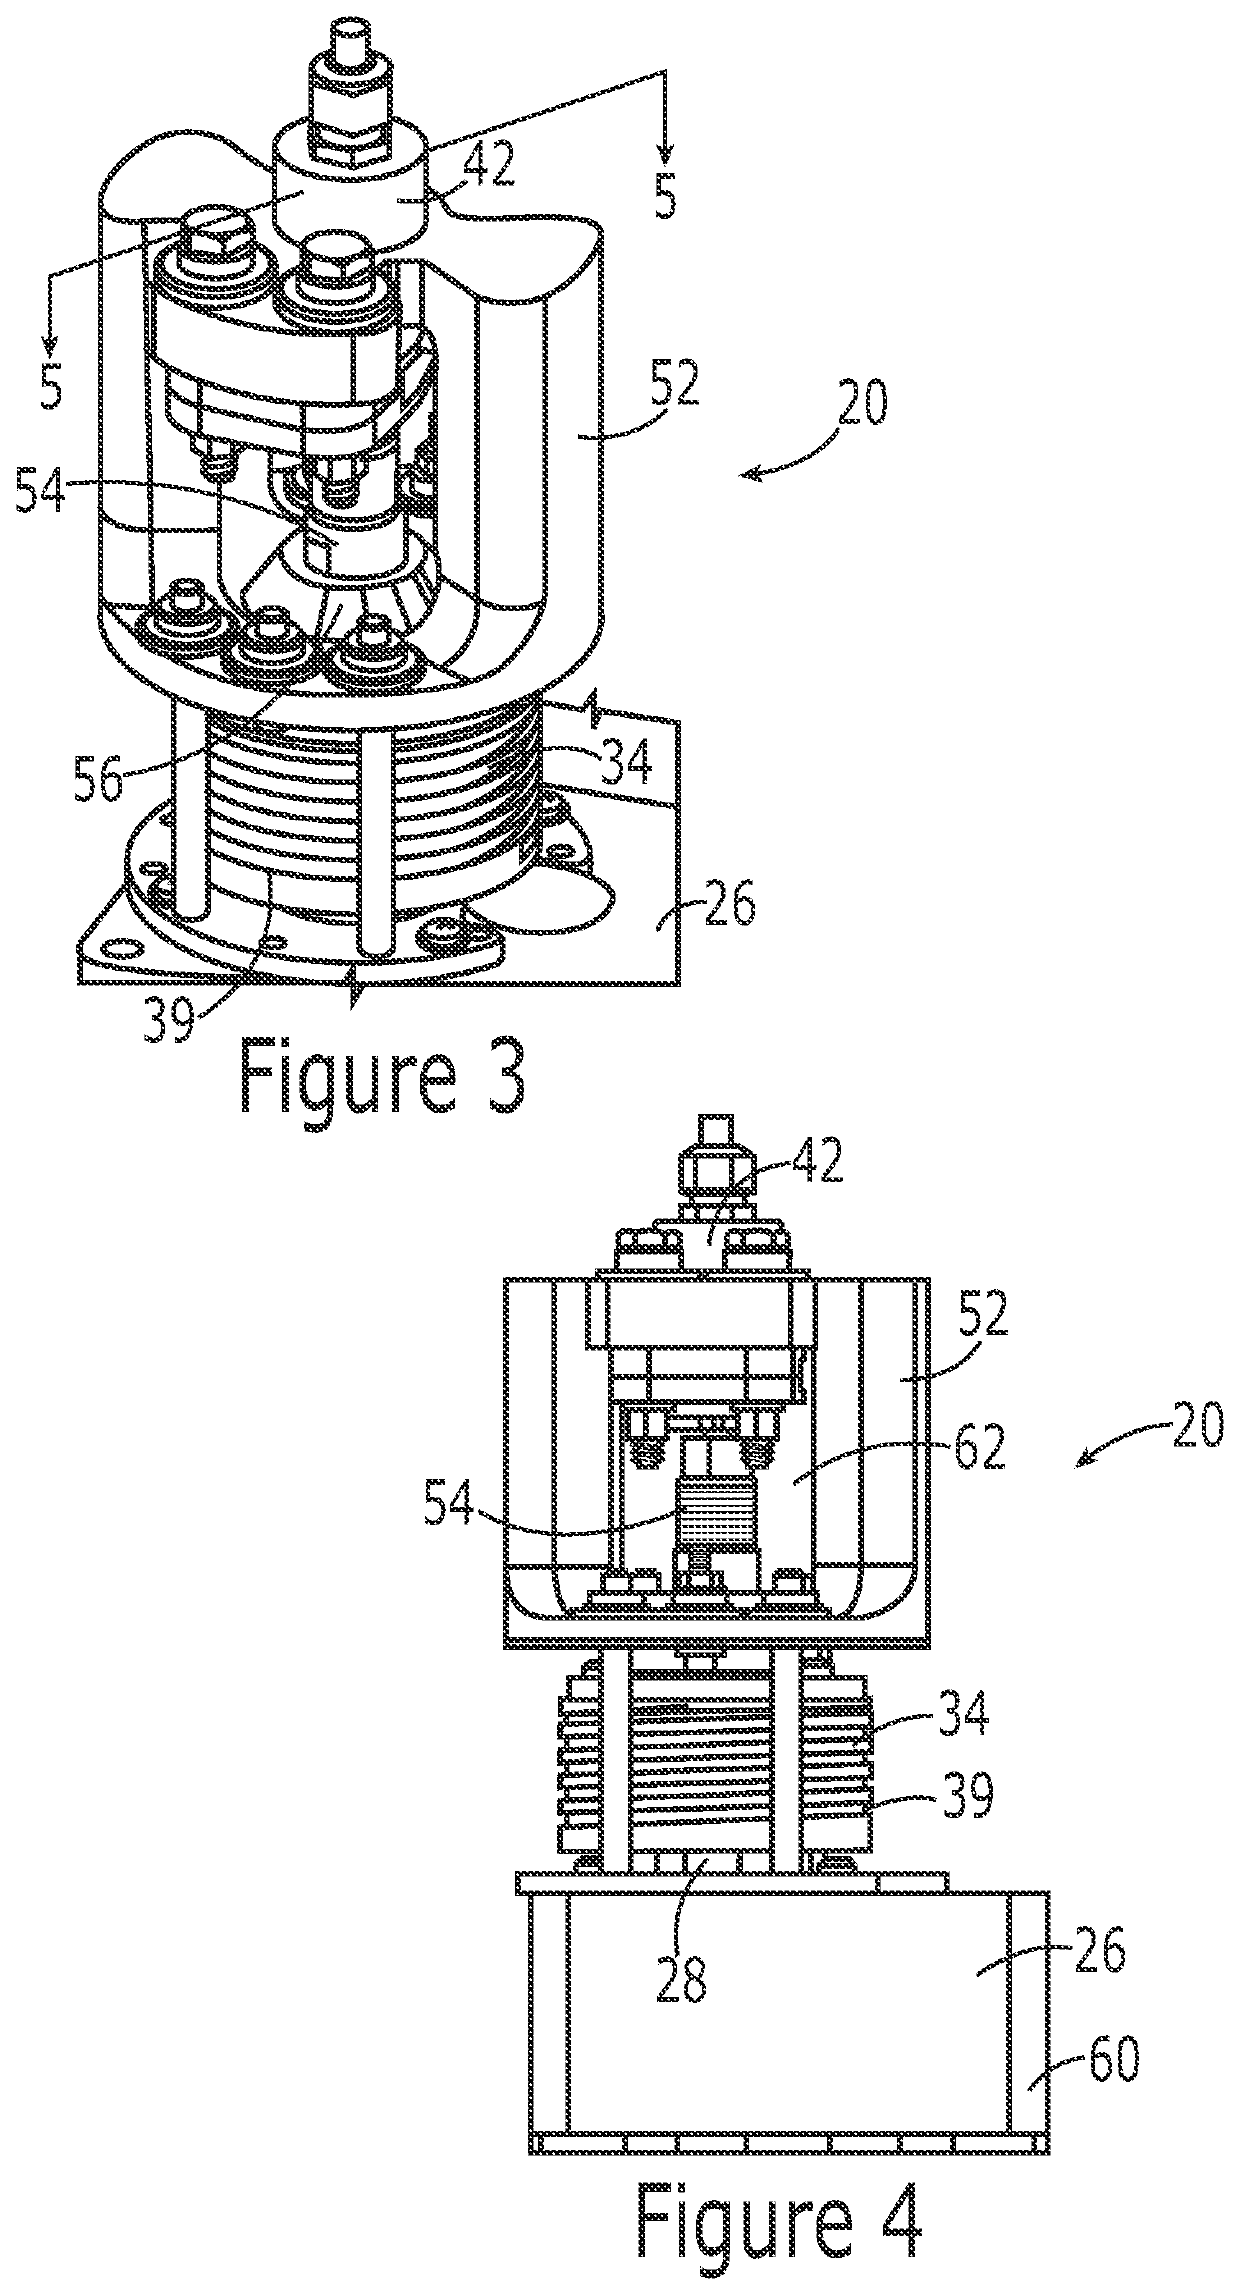 Control system and method to detect clutch slippage